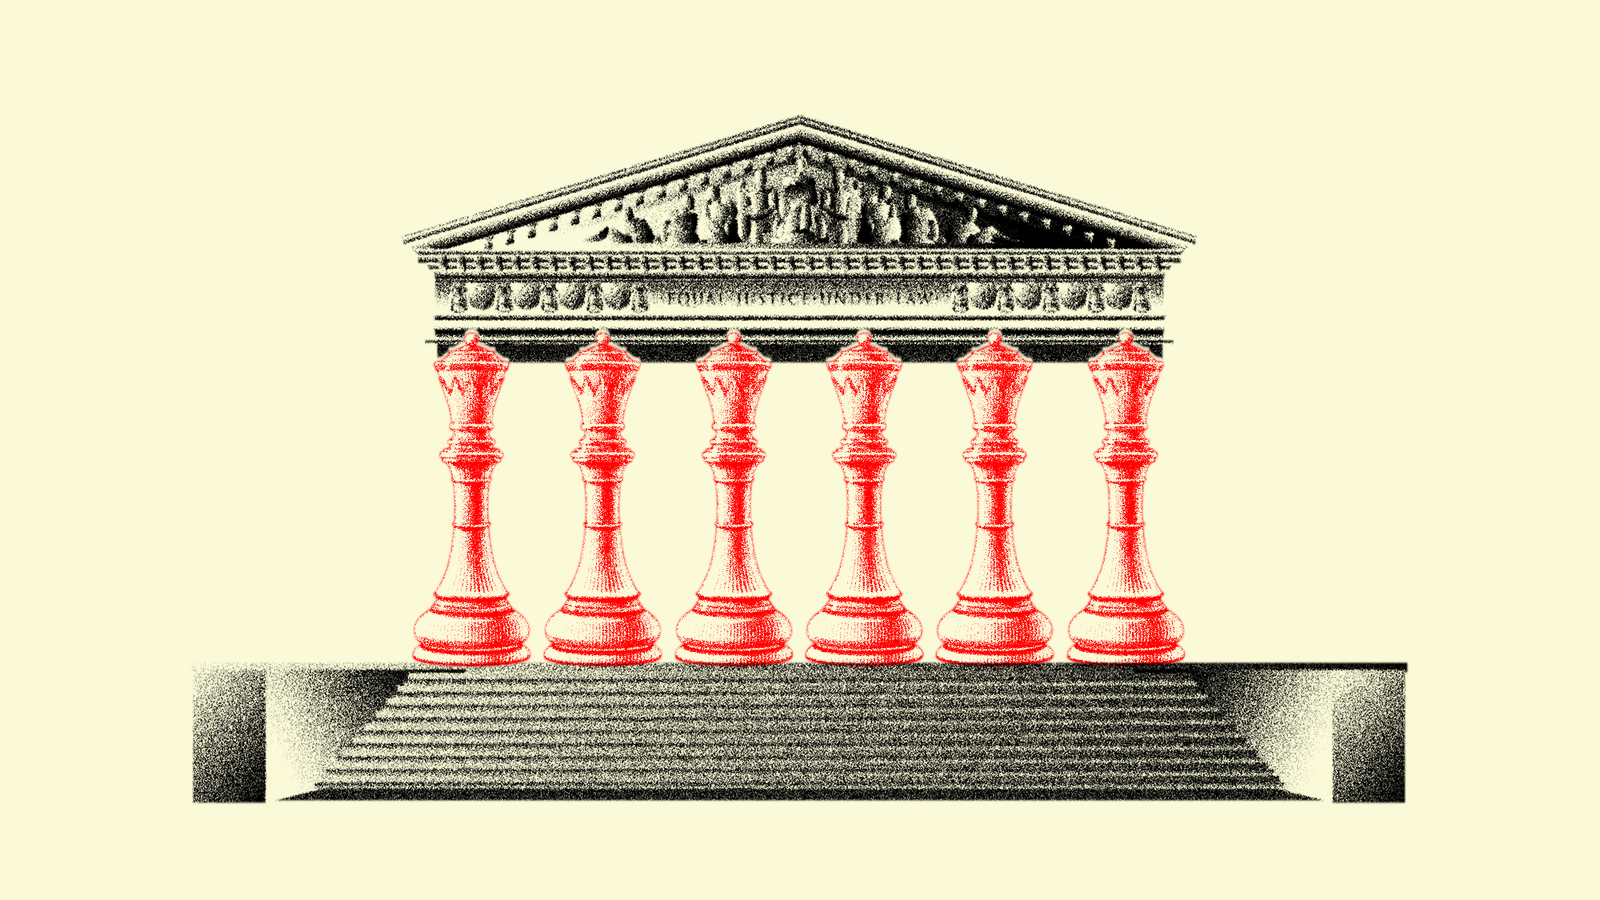 Why the Supreme Court's Rulings Have Profound Implications for